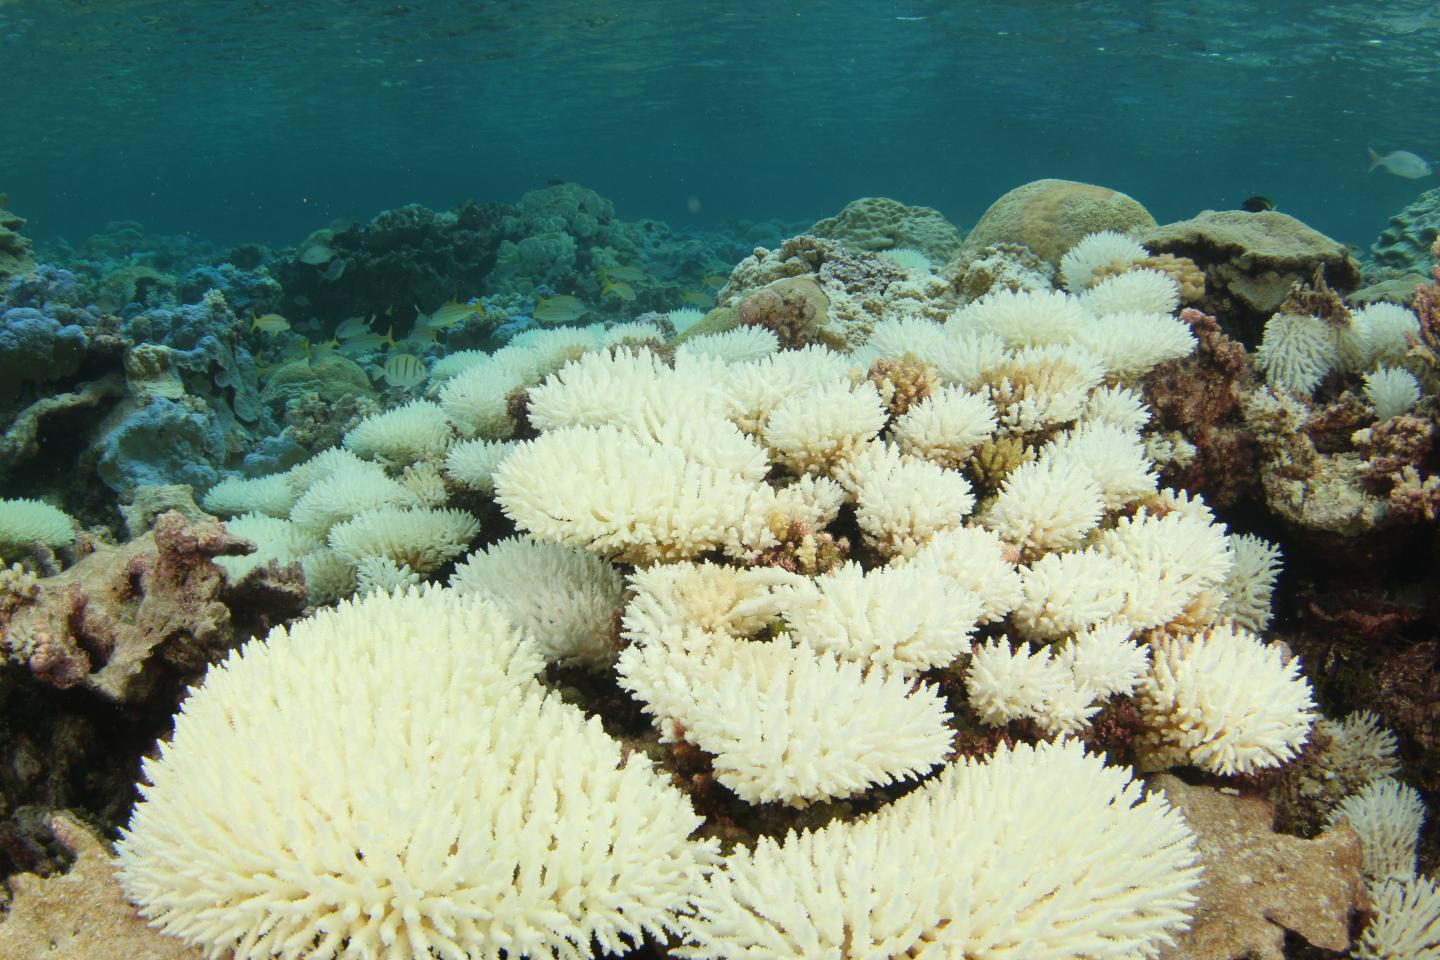 This is bleaching at Palmyra Atoll in 2015 (Source: Brian Zgliczynski)